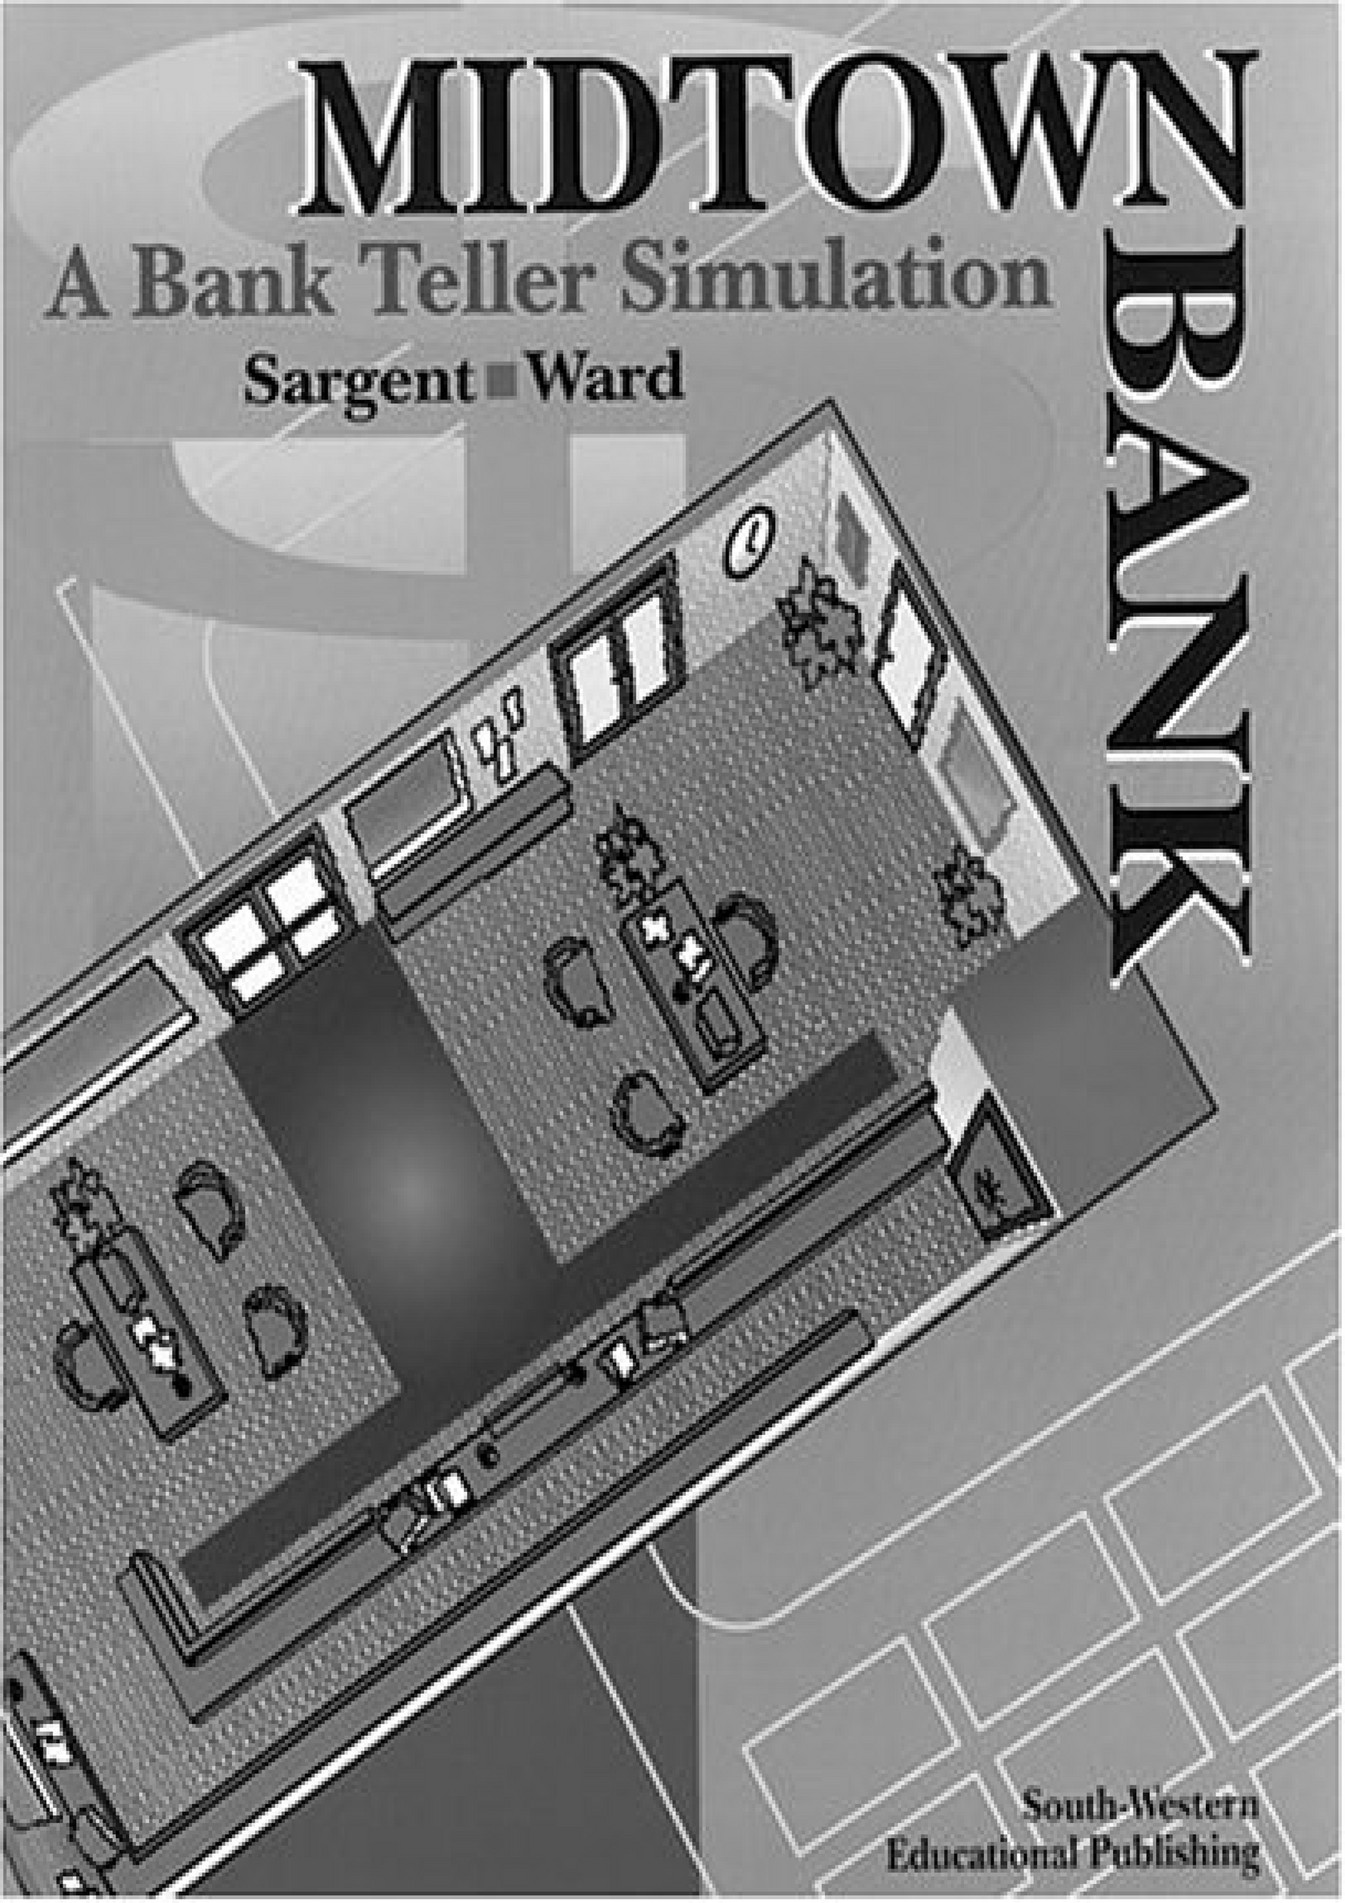 aubrey-doownload-midtown-bank-a-bank-teller-simulation-page-1-created-with-publitas